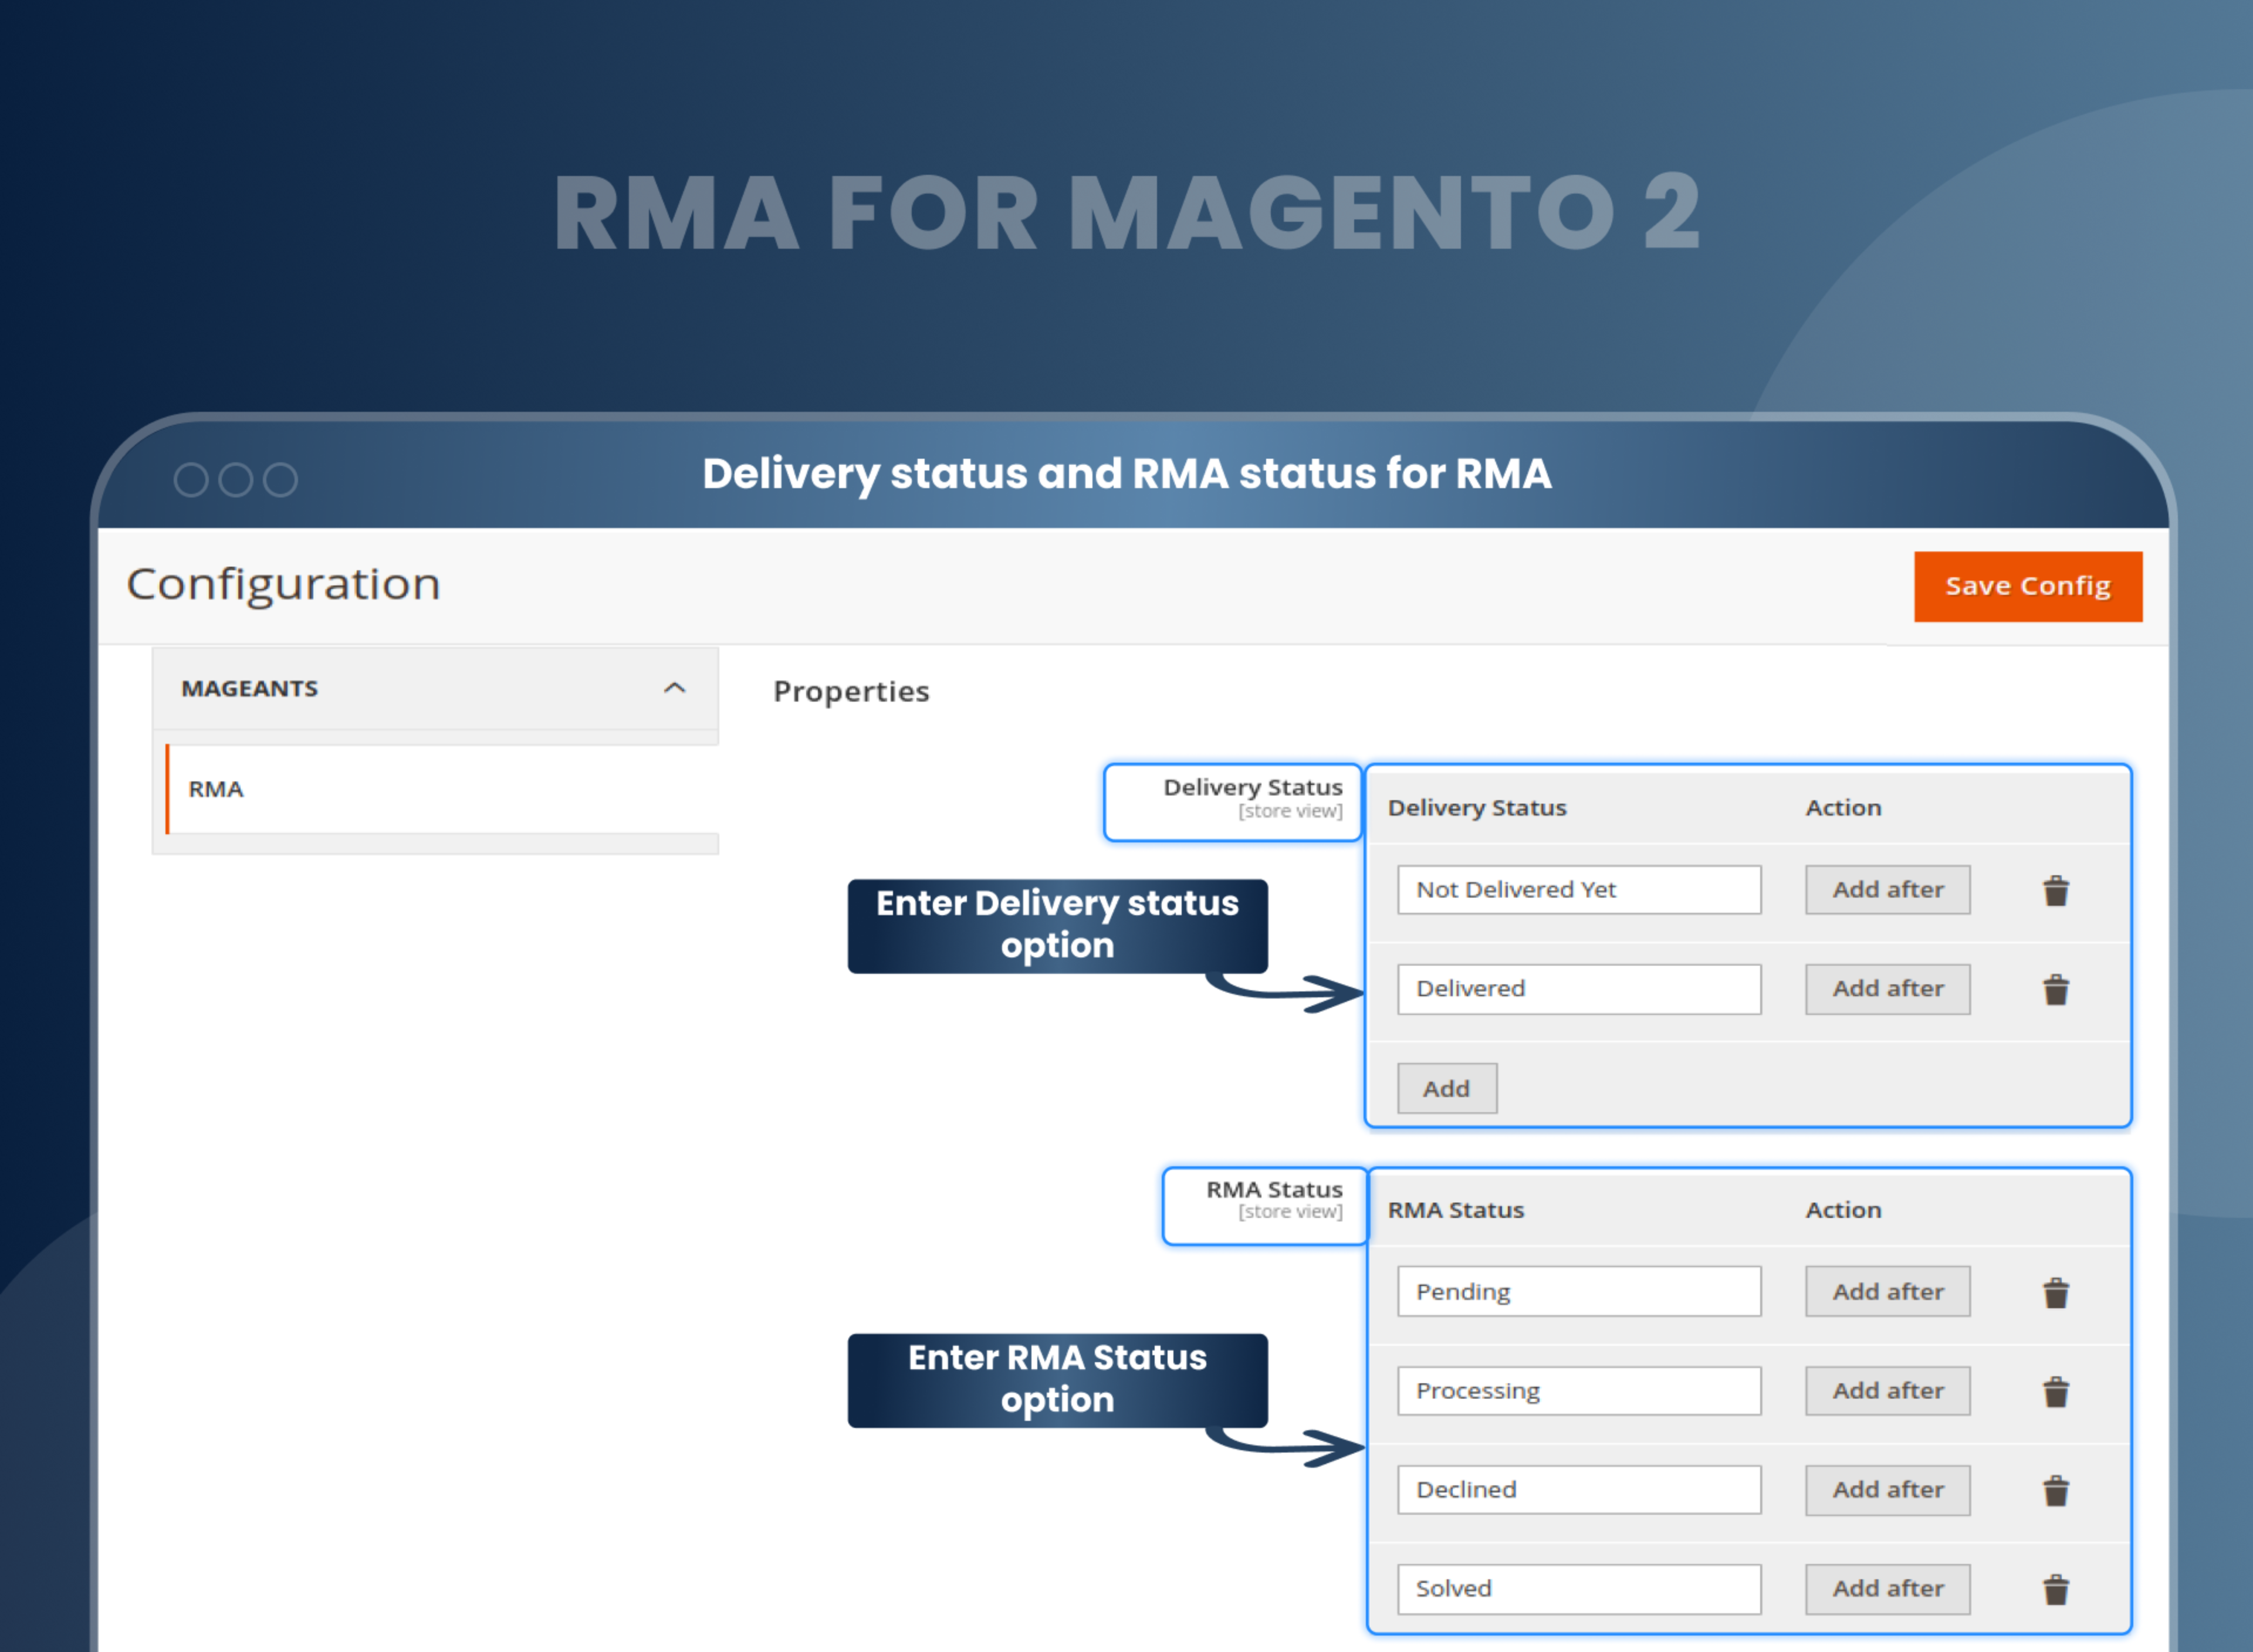 Delivery status and RMA status for RMA